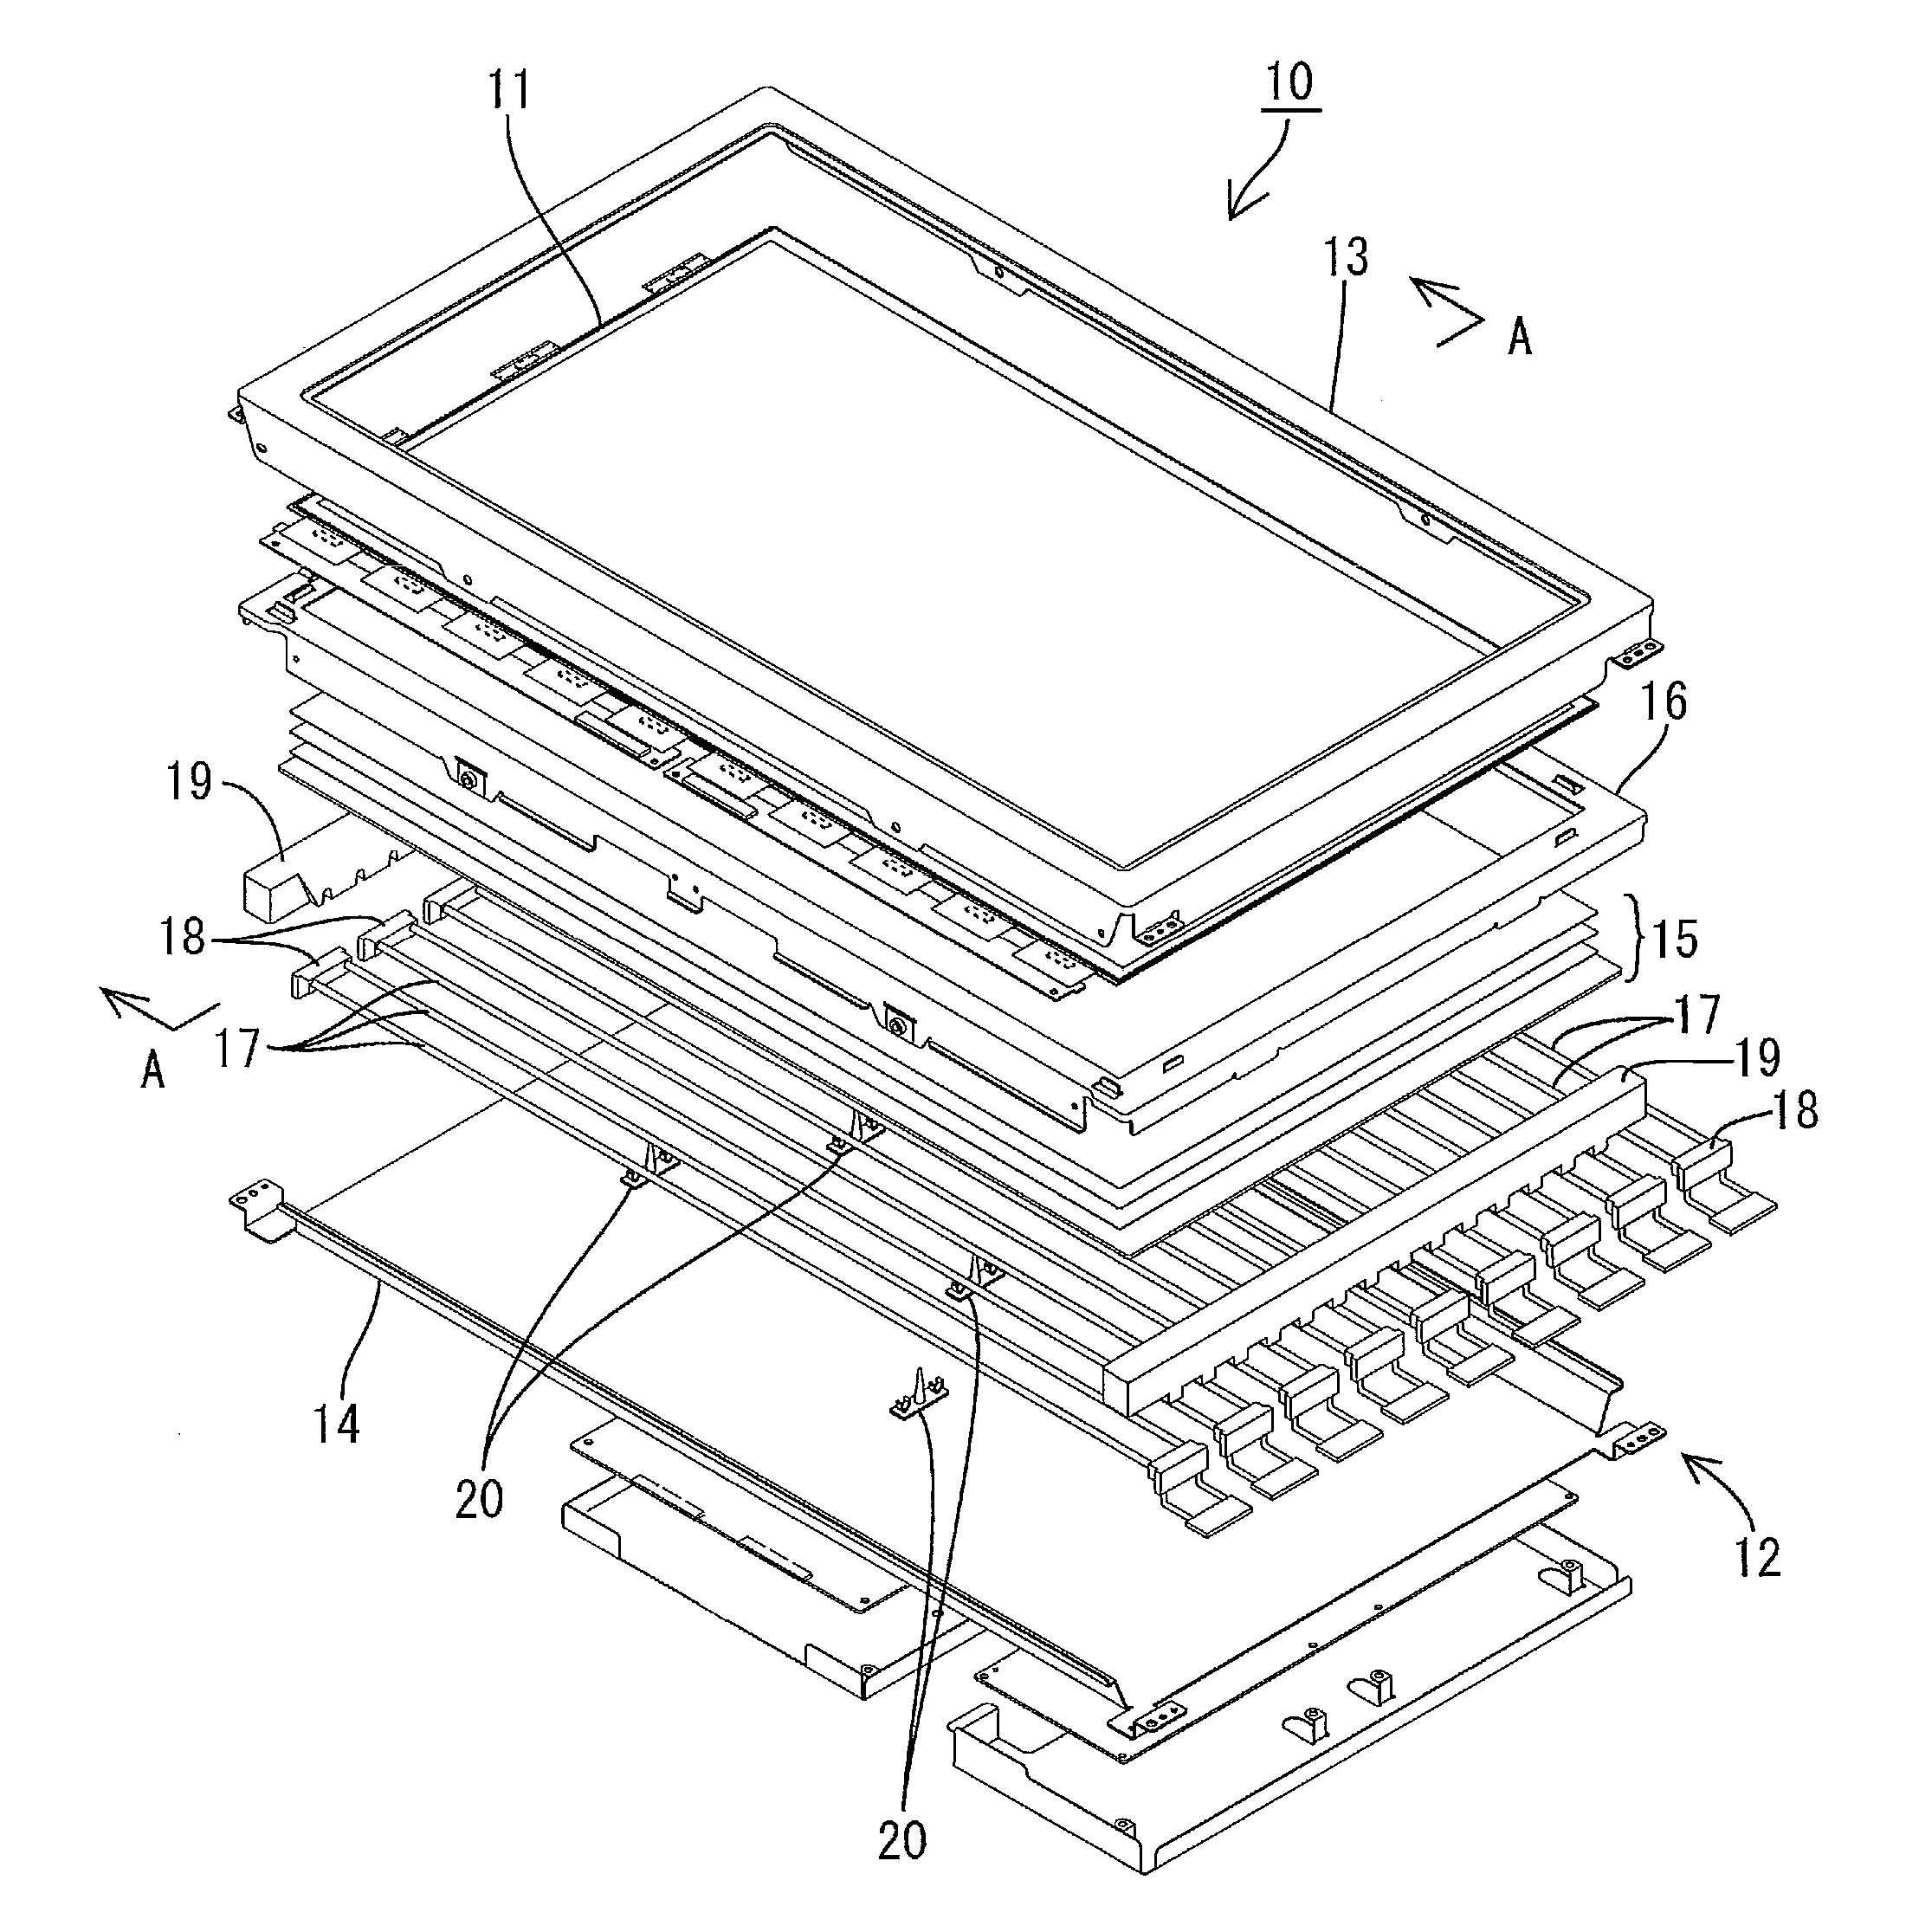 Liquid crystal display device and method of manufacturing same